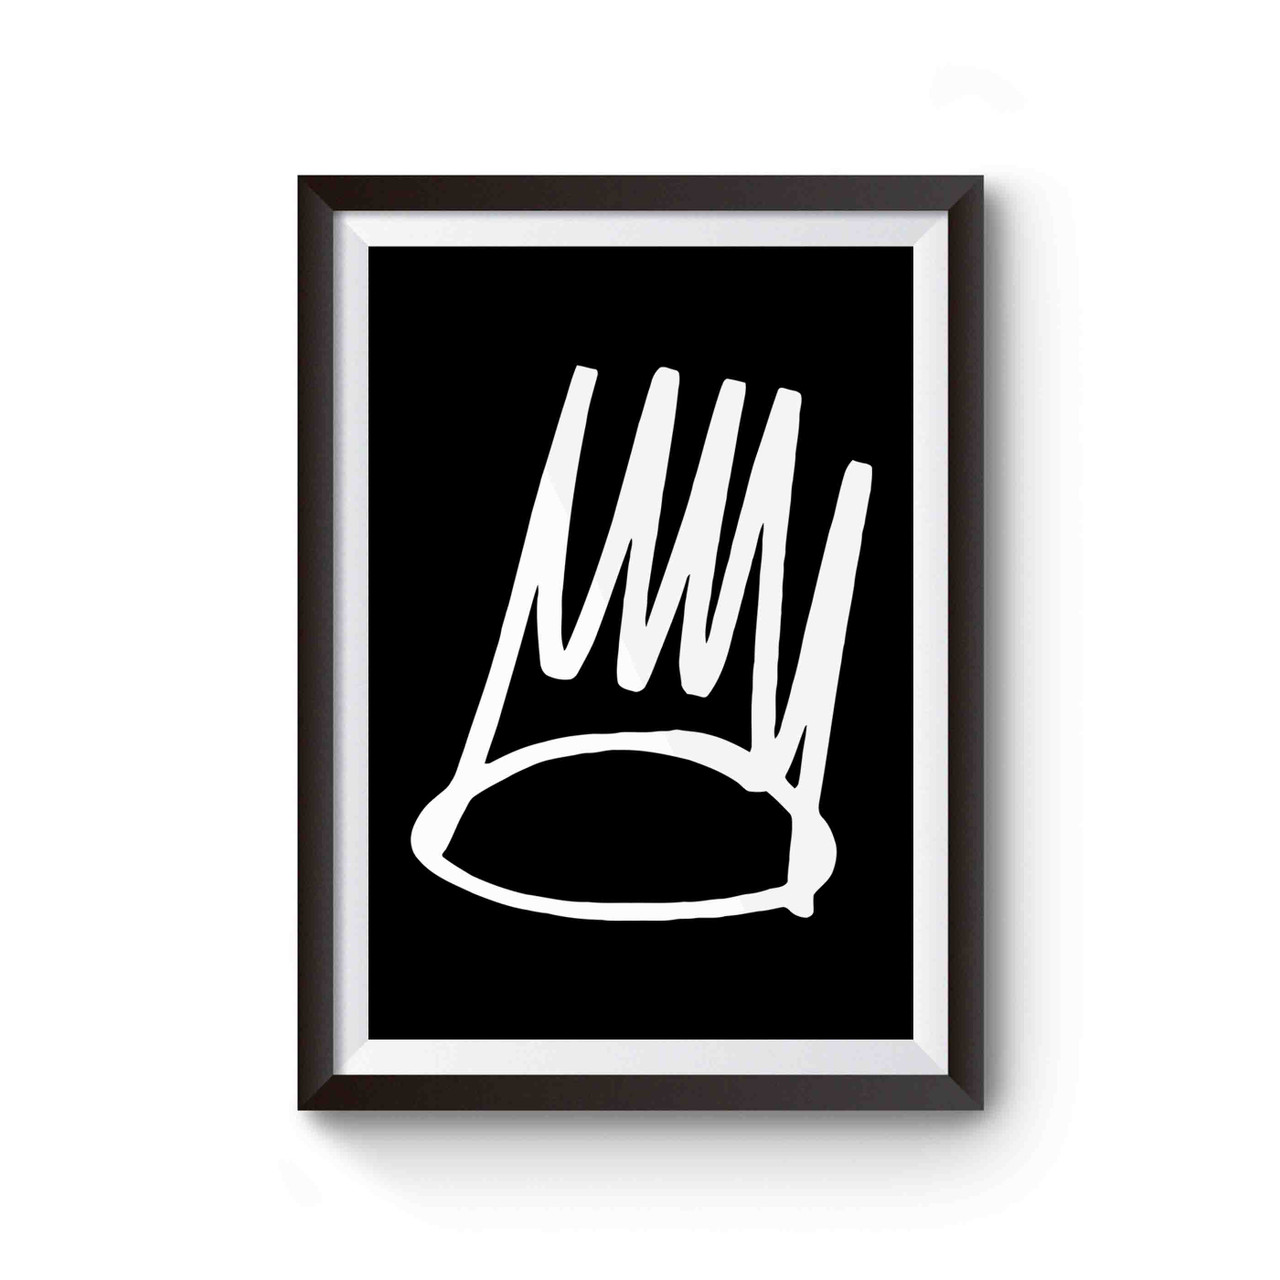 Born Sinner Stickers for Sale  Redbubble